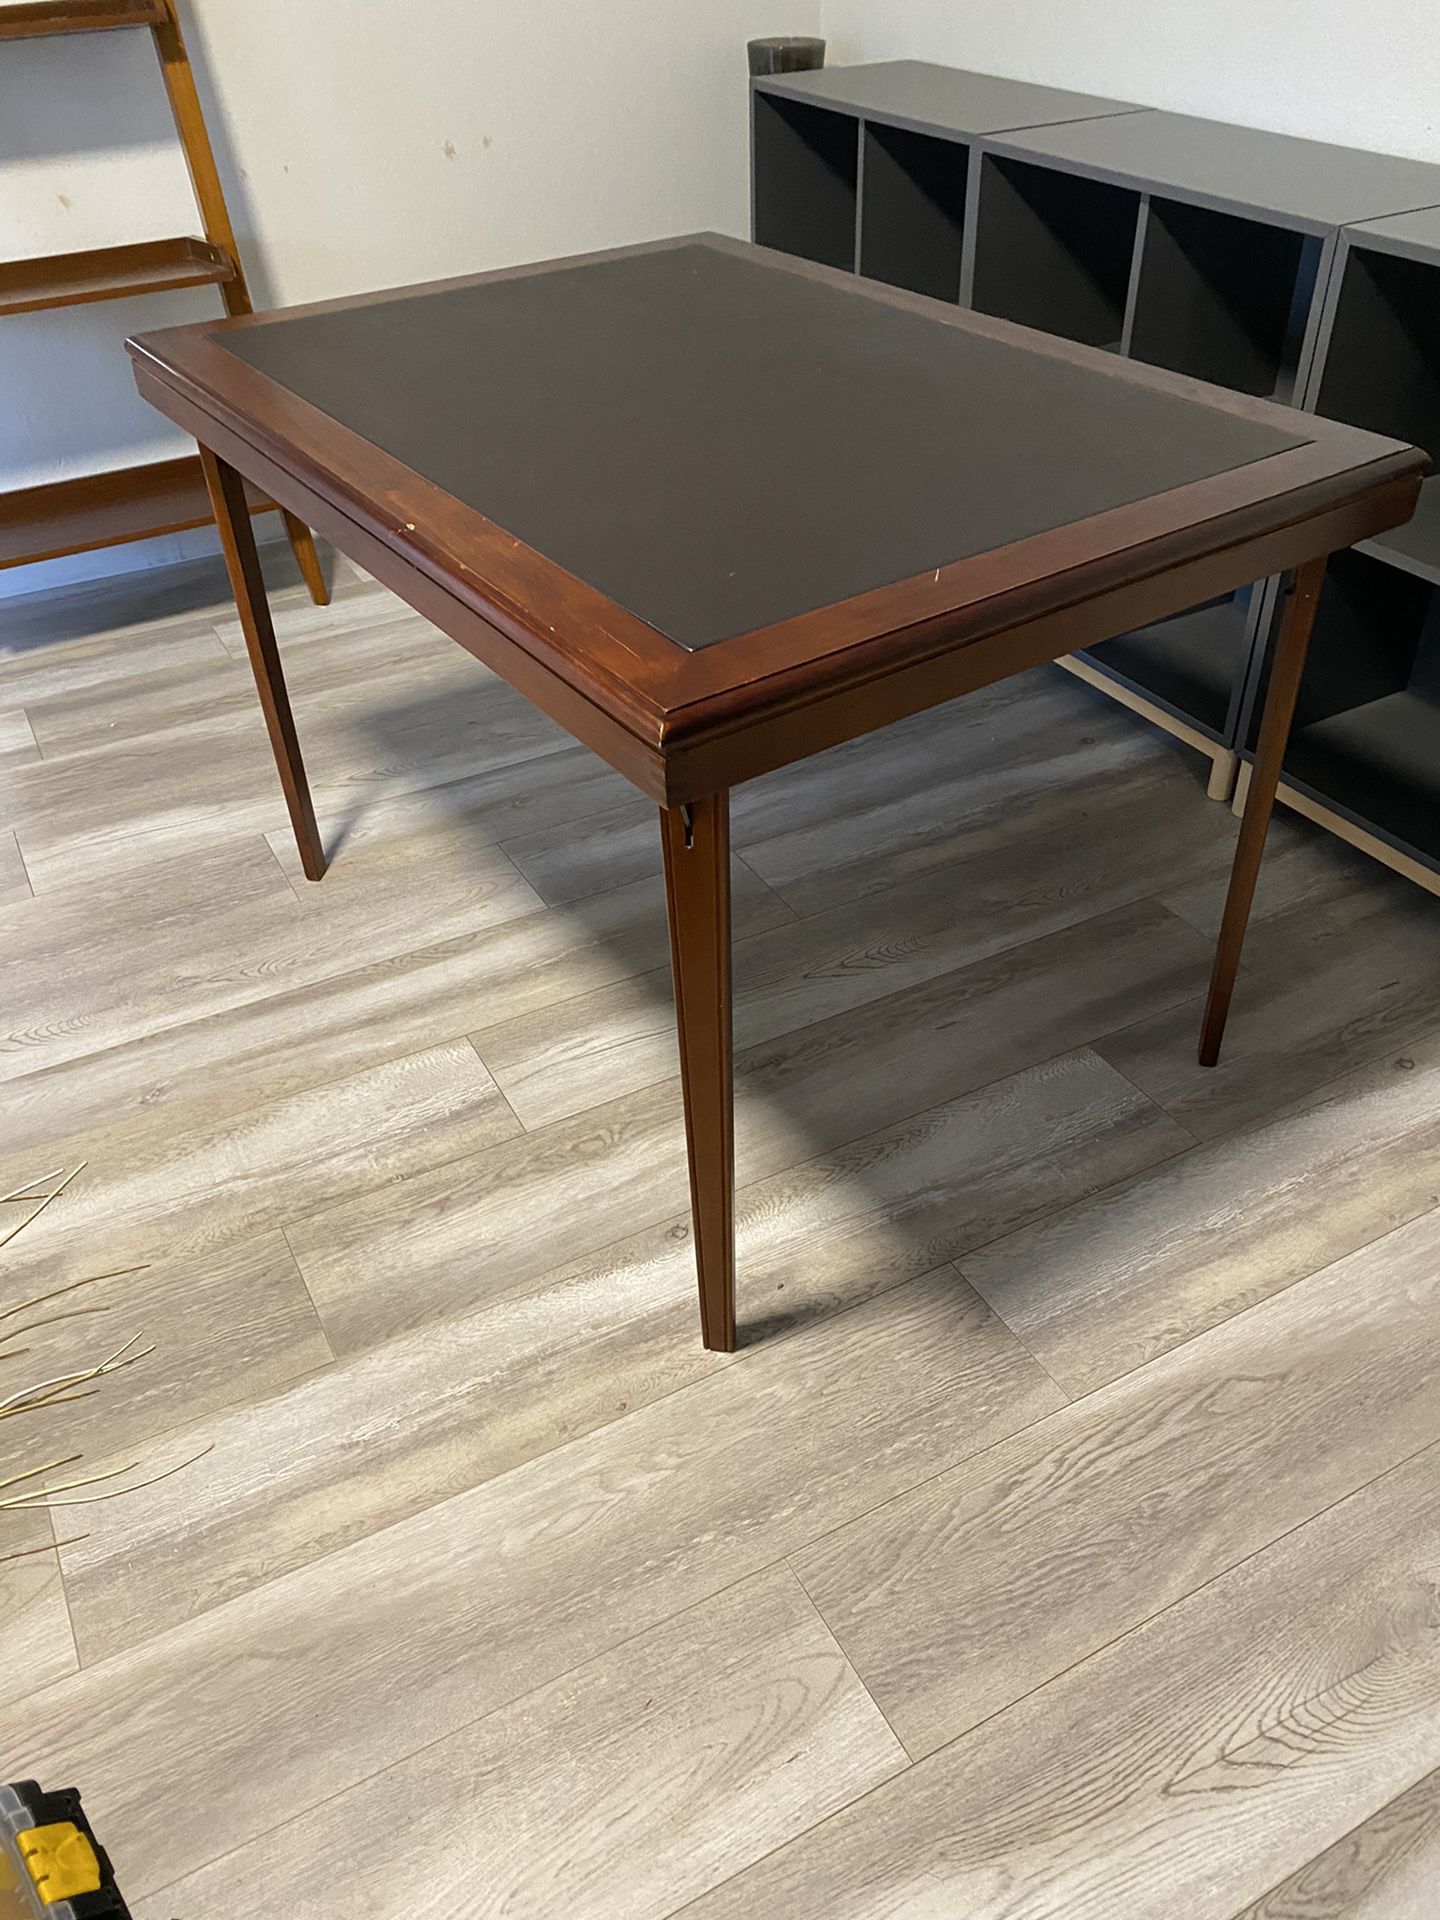 Foldable table / dining / desk